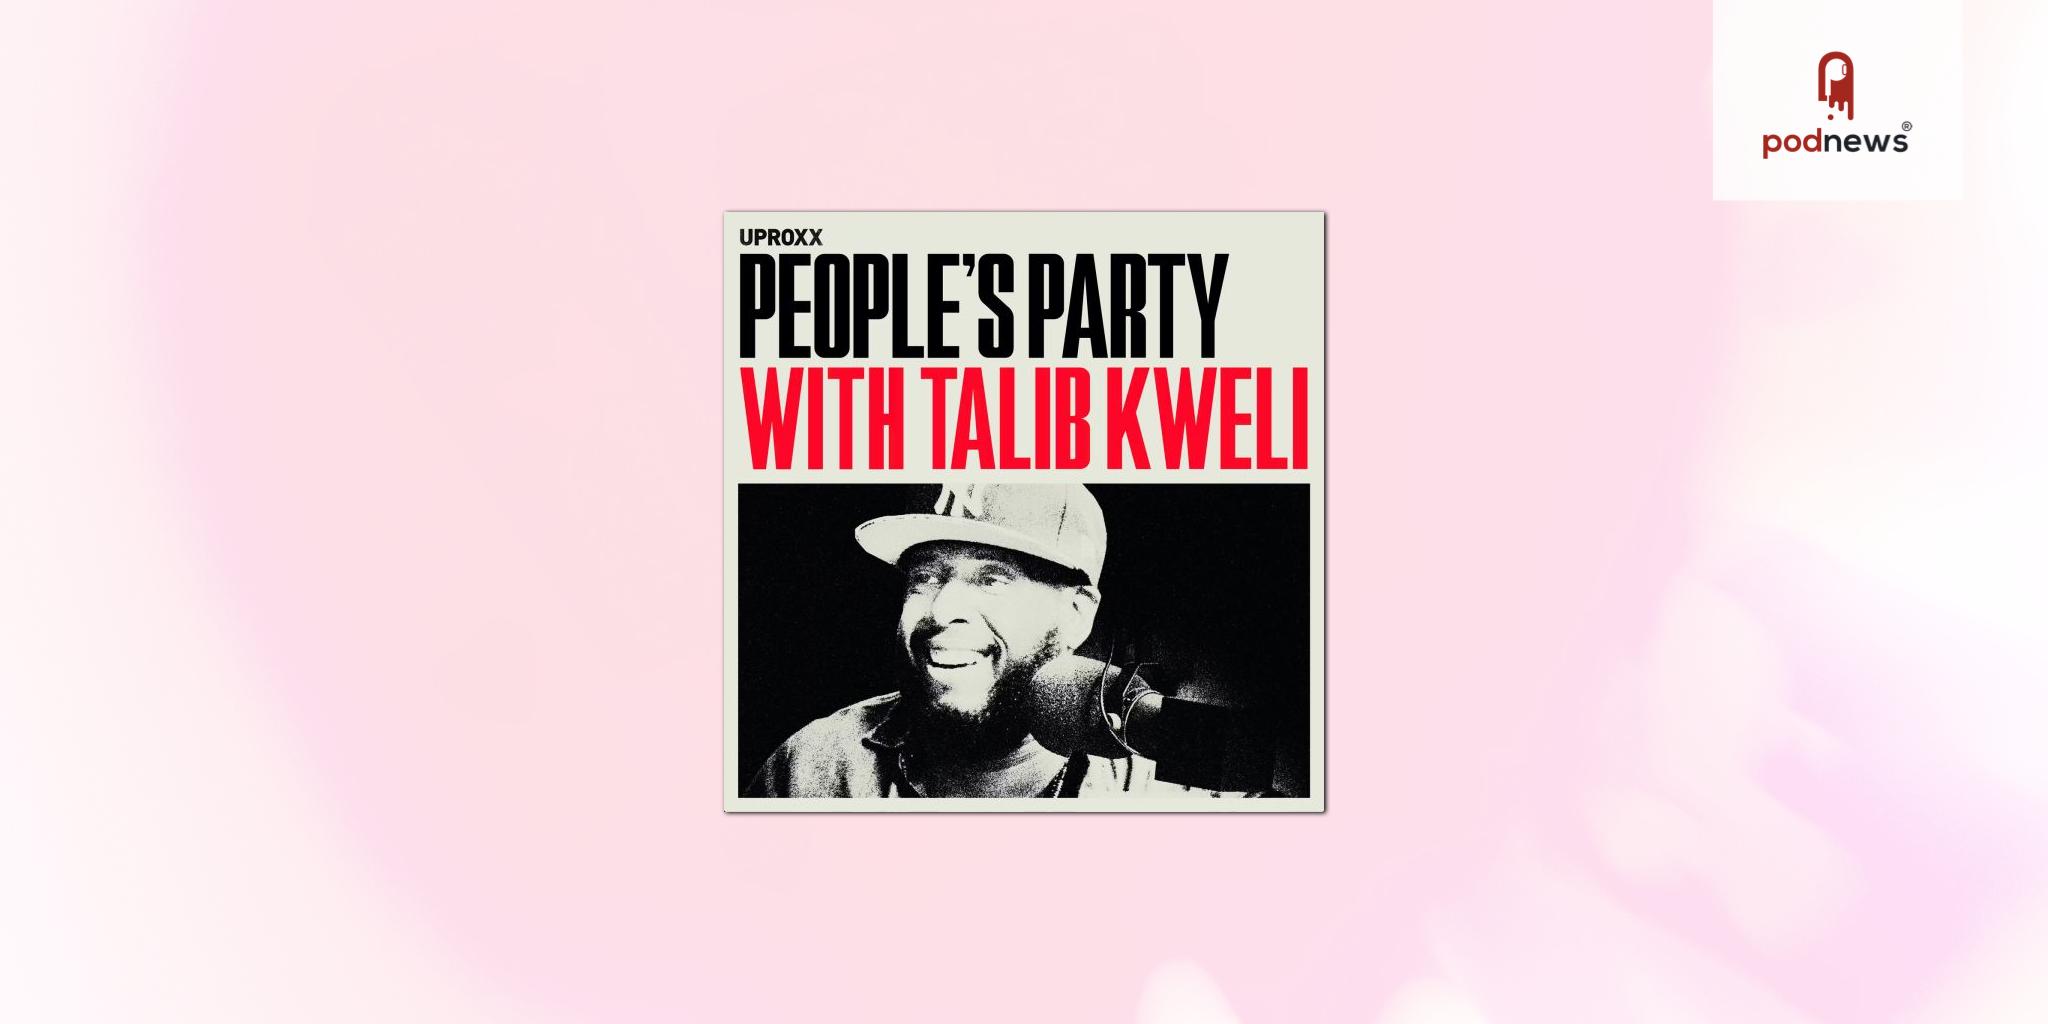 Luminary and Uproxx announce People's Party with Talib Kweli podcast moving to Luminary